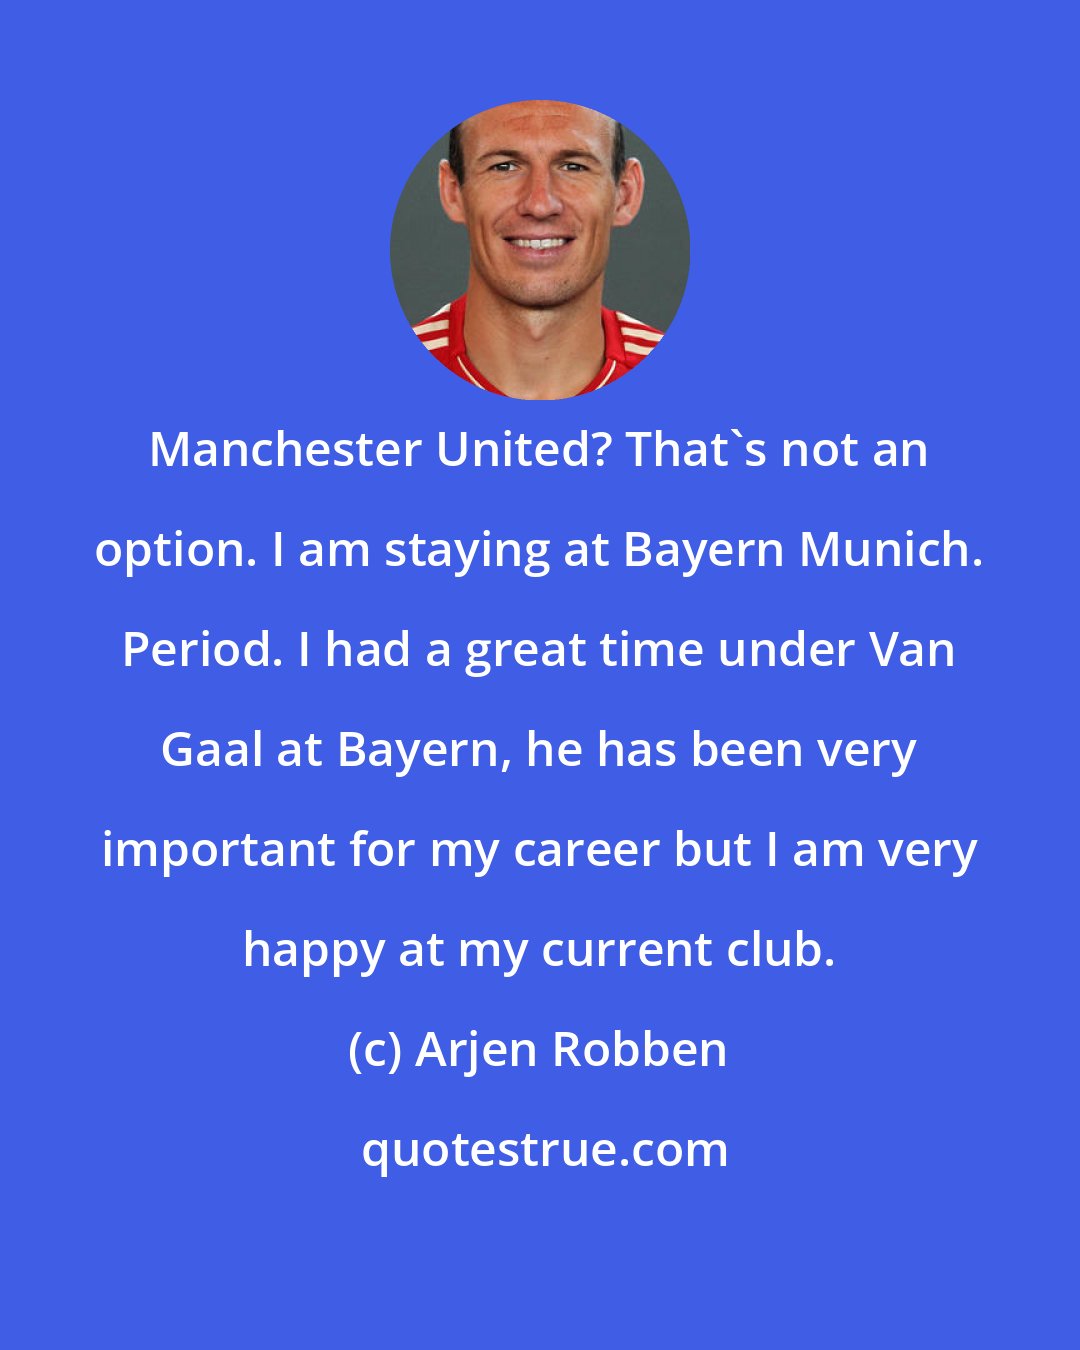 Arjen Robben: Manchester United? That's not an option. I am staying at Bayern Munich. Period. I had a great time under Van Gaal at Bayern, he has been very important for my career but I am very happy at my current club.